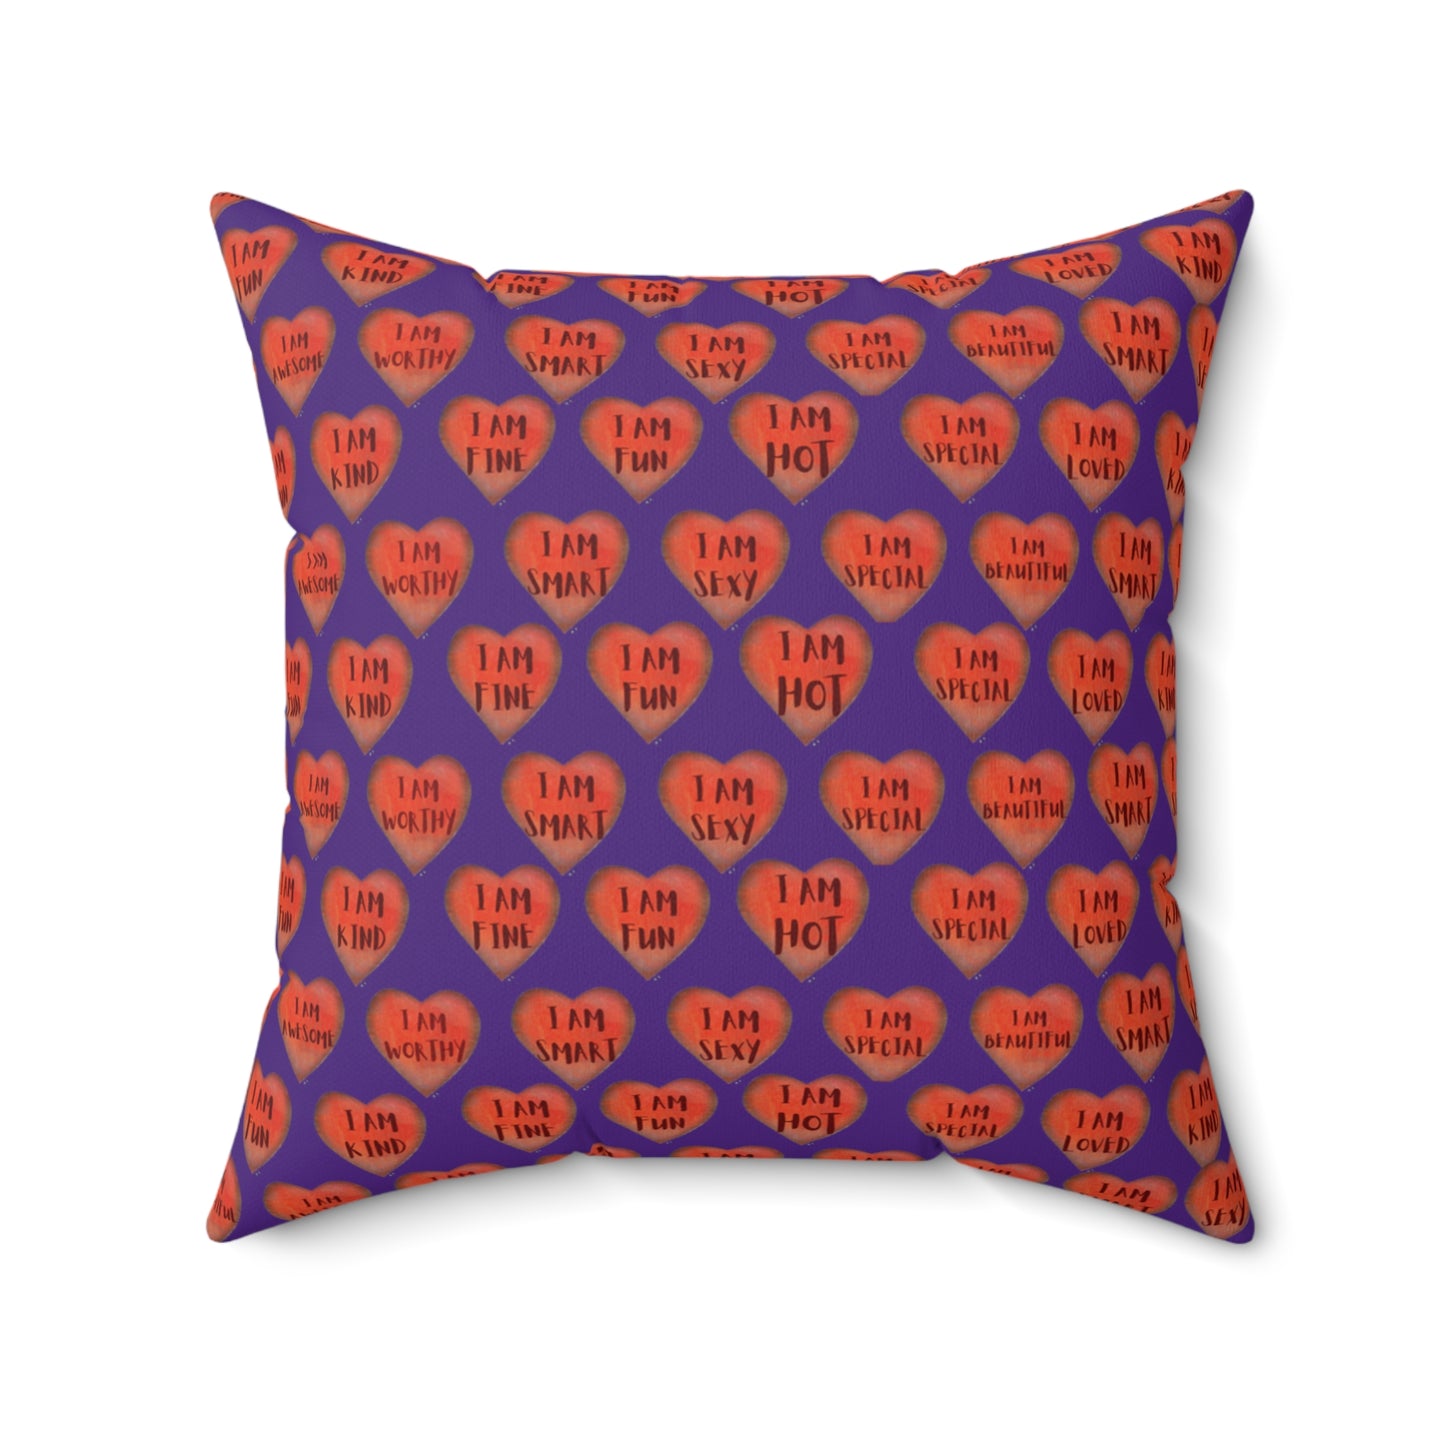 Colorful Faux Suede Pillow - Red Heart motivational pillow - Purple Throw Pillow - Inspirational Decorative pillow